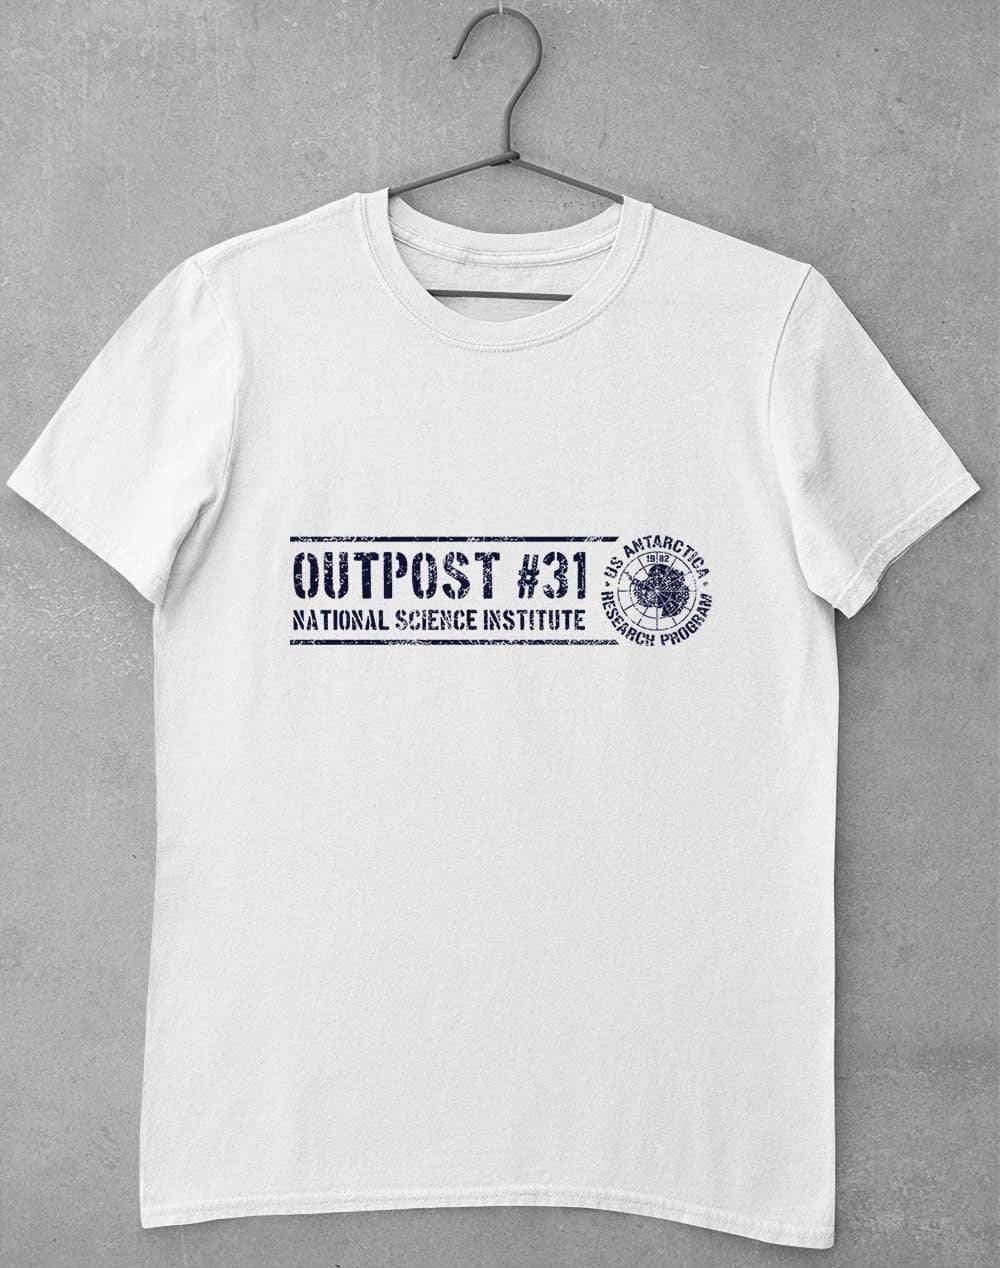 Outpost 31 Antarctica T-Shirt S / White  - Off World Tees